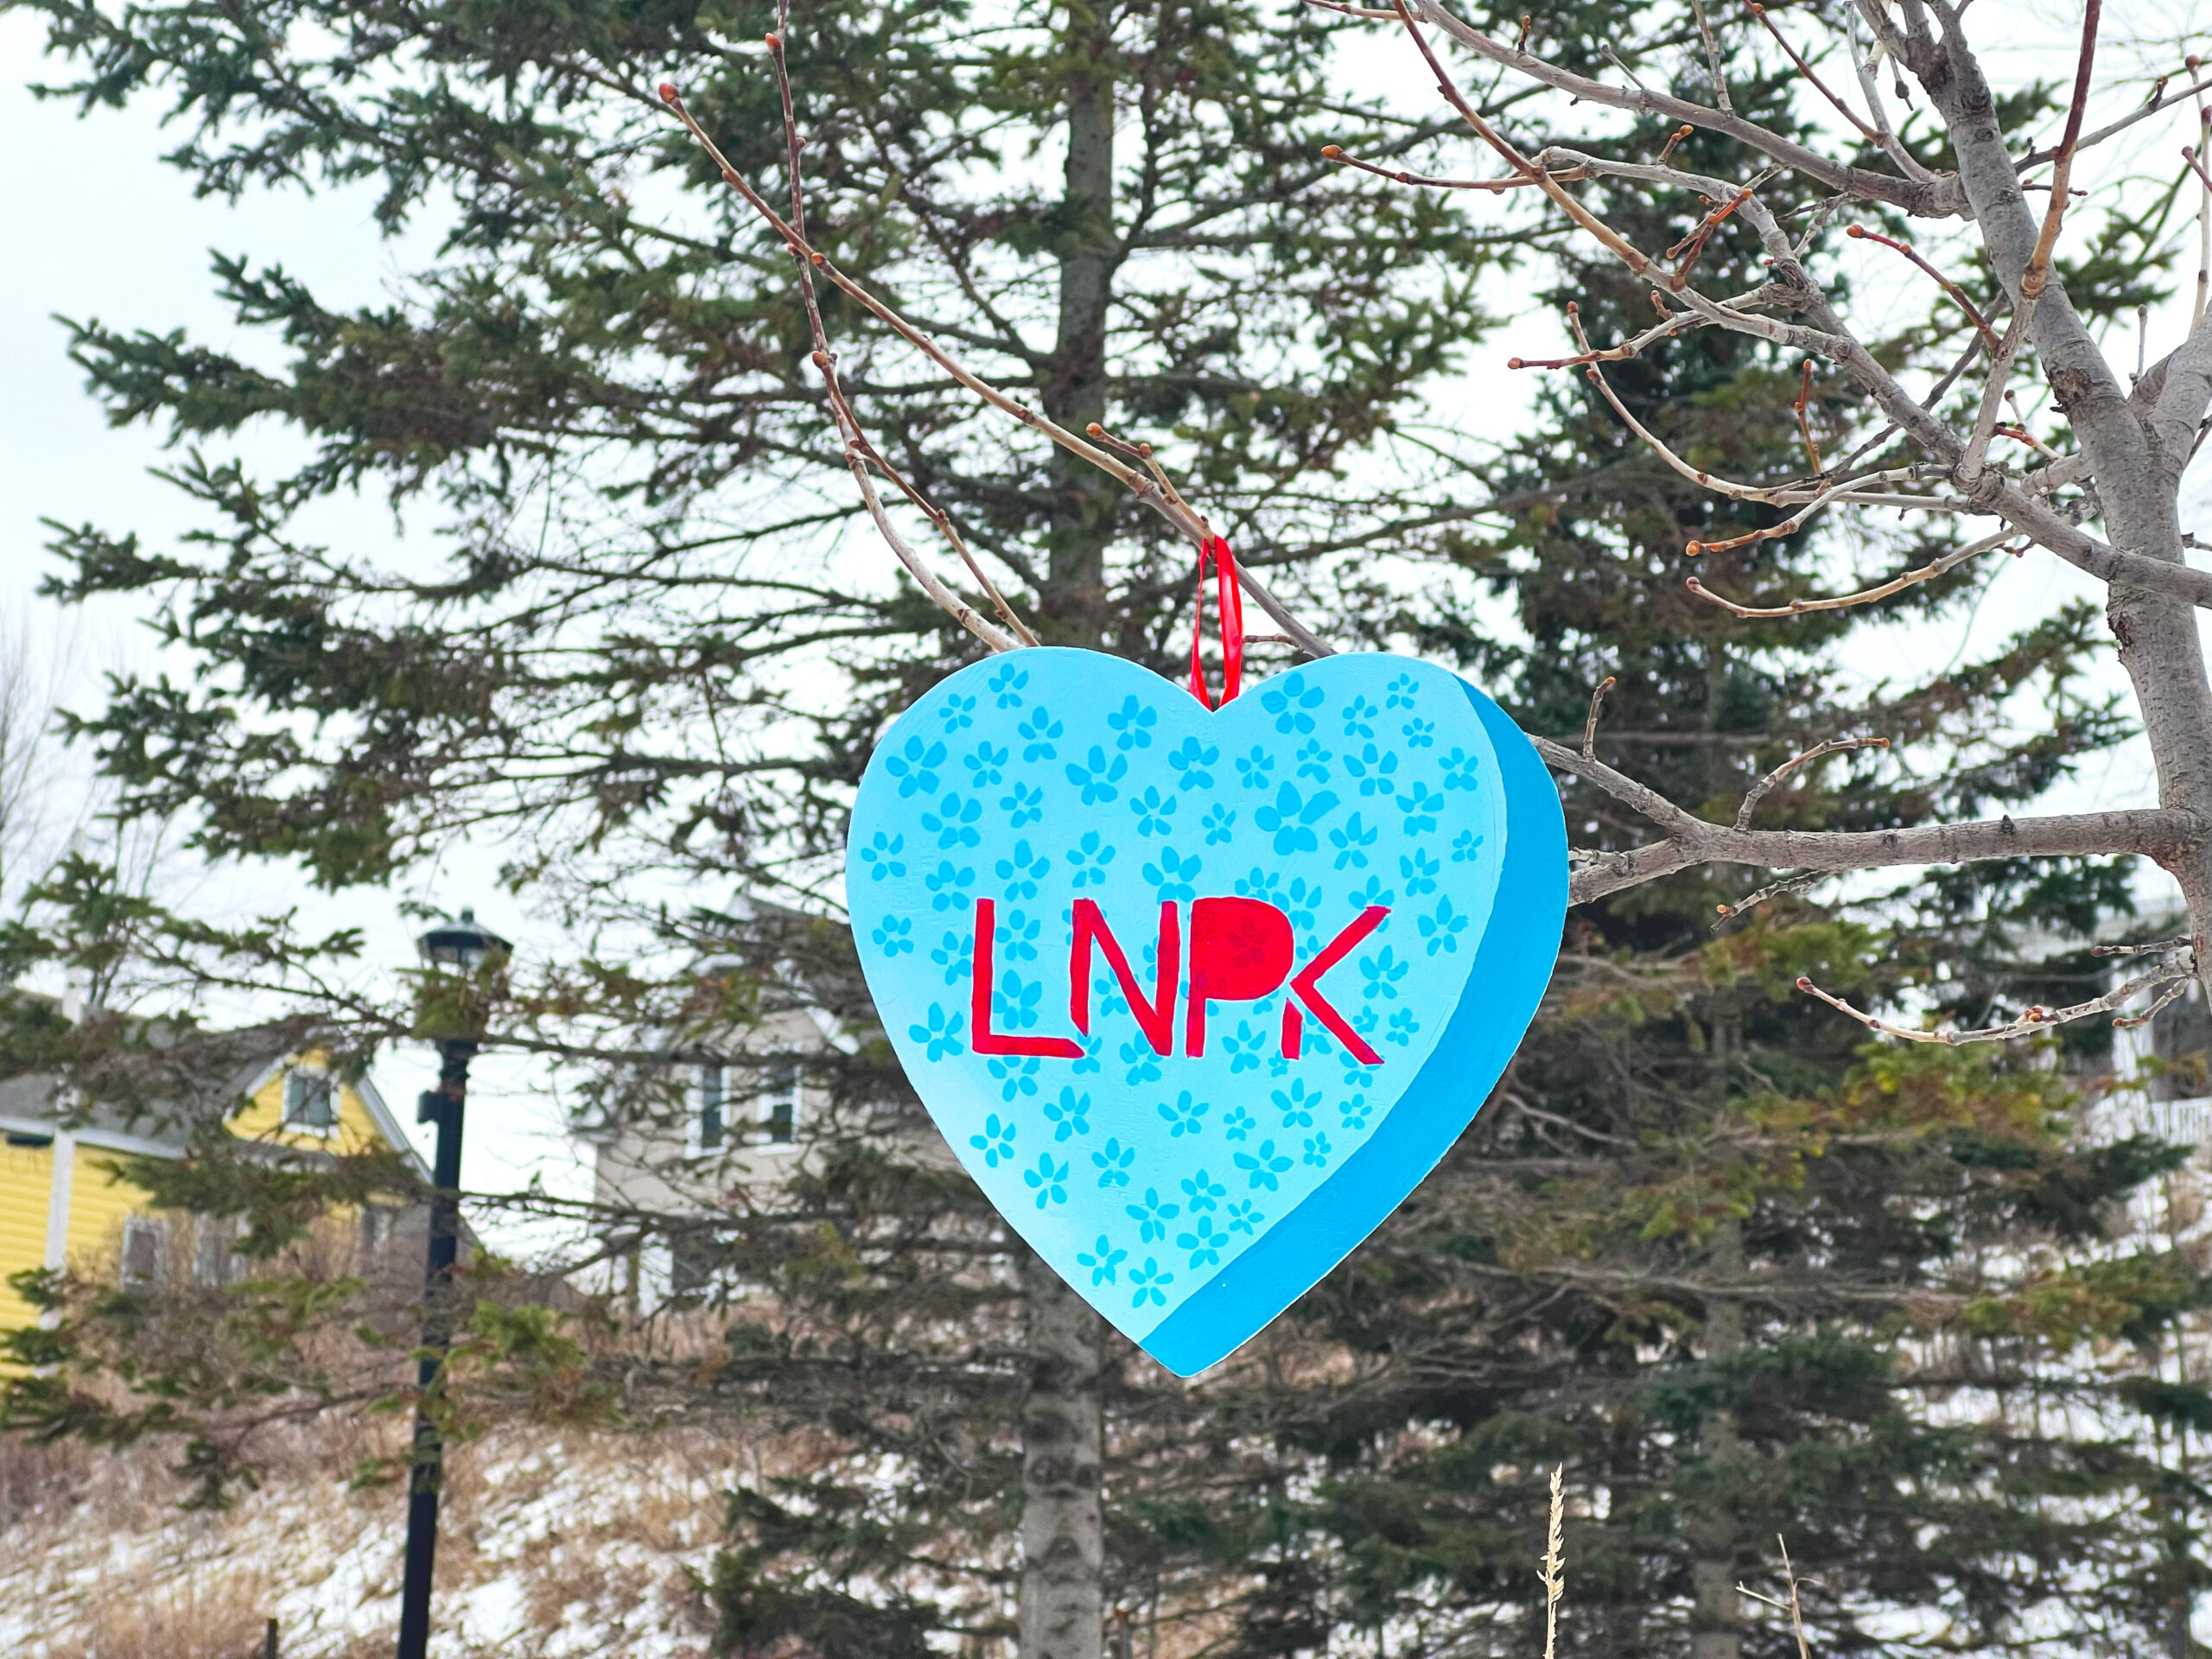 Light blue heart with dark blue flowers and "LNPK" in red hangs on an evergreen tree.